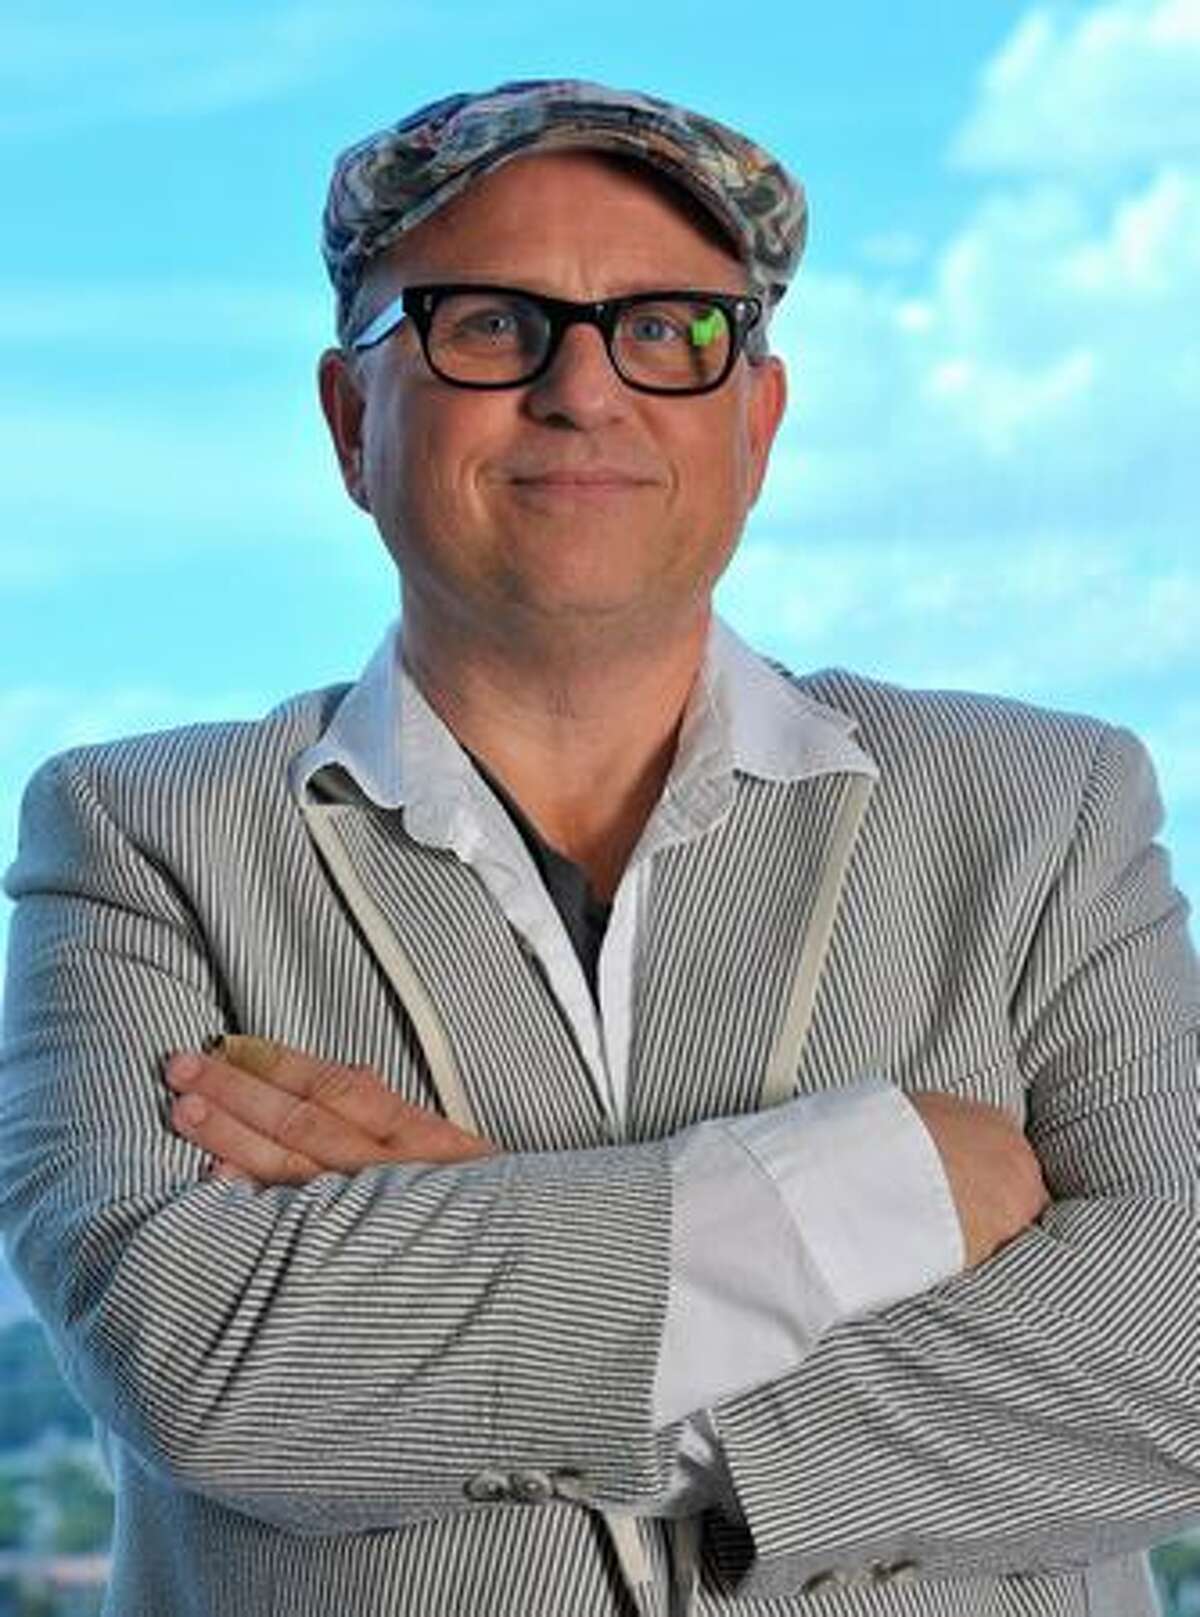 Actor/director Bobcat Goldthwait poses for a portrait during the 11th annual CineVegas film festival in Las Vegas on June 14.